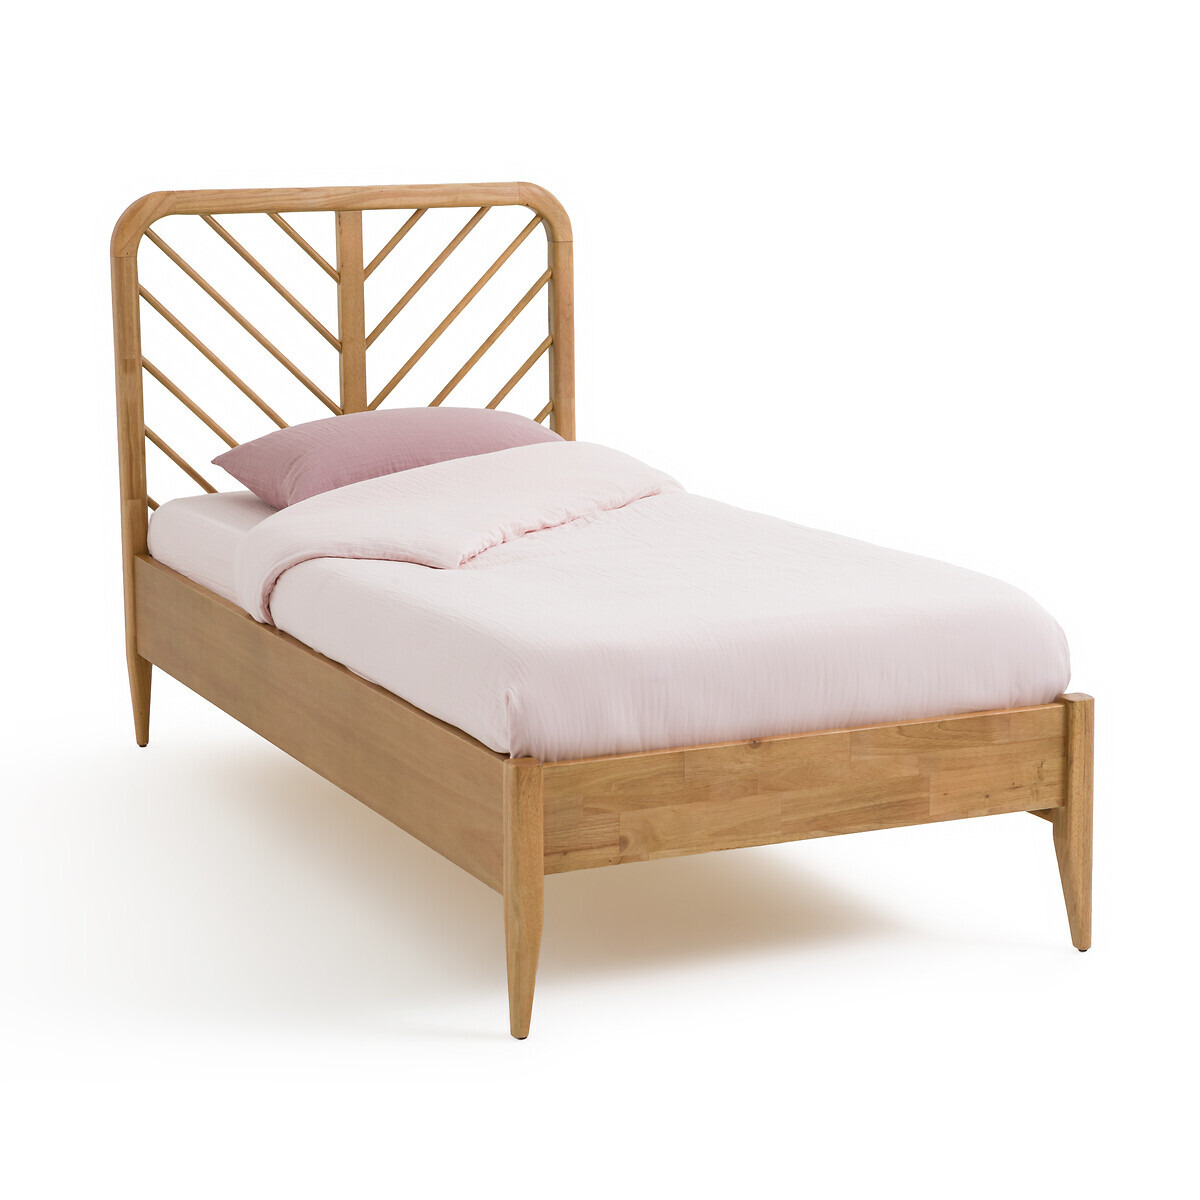 Anda Solid Wood Bed - image 1